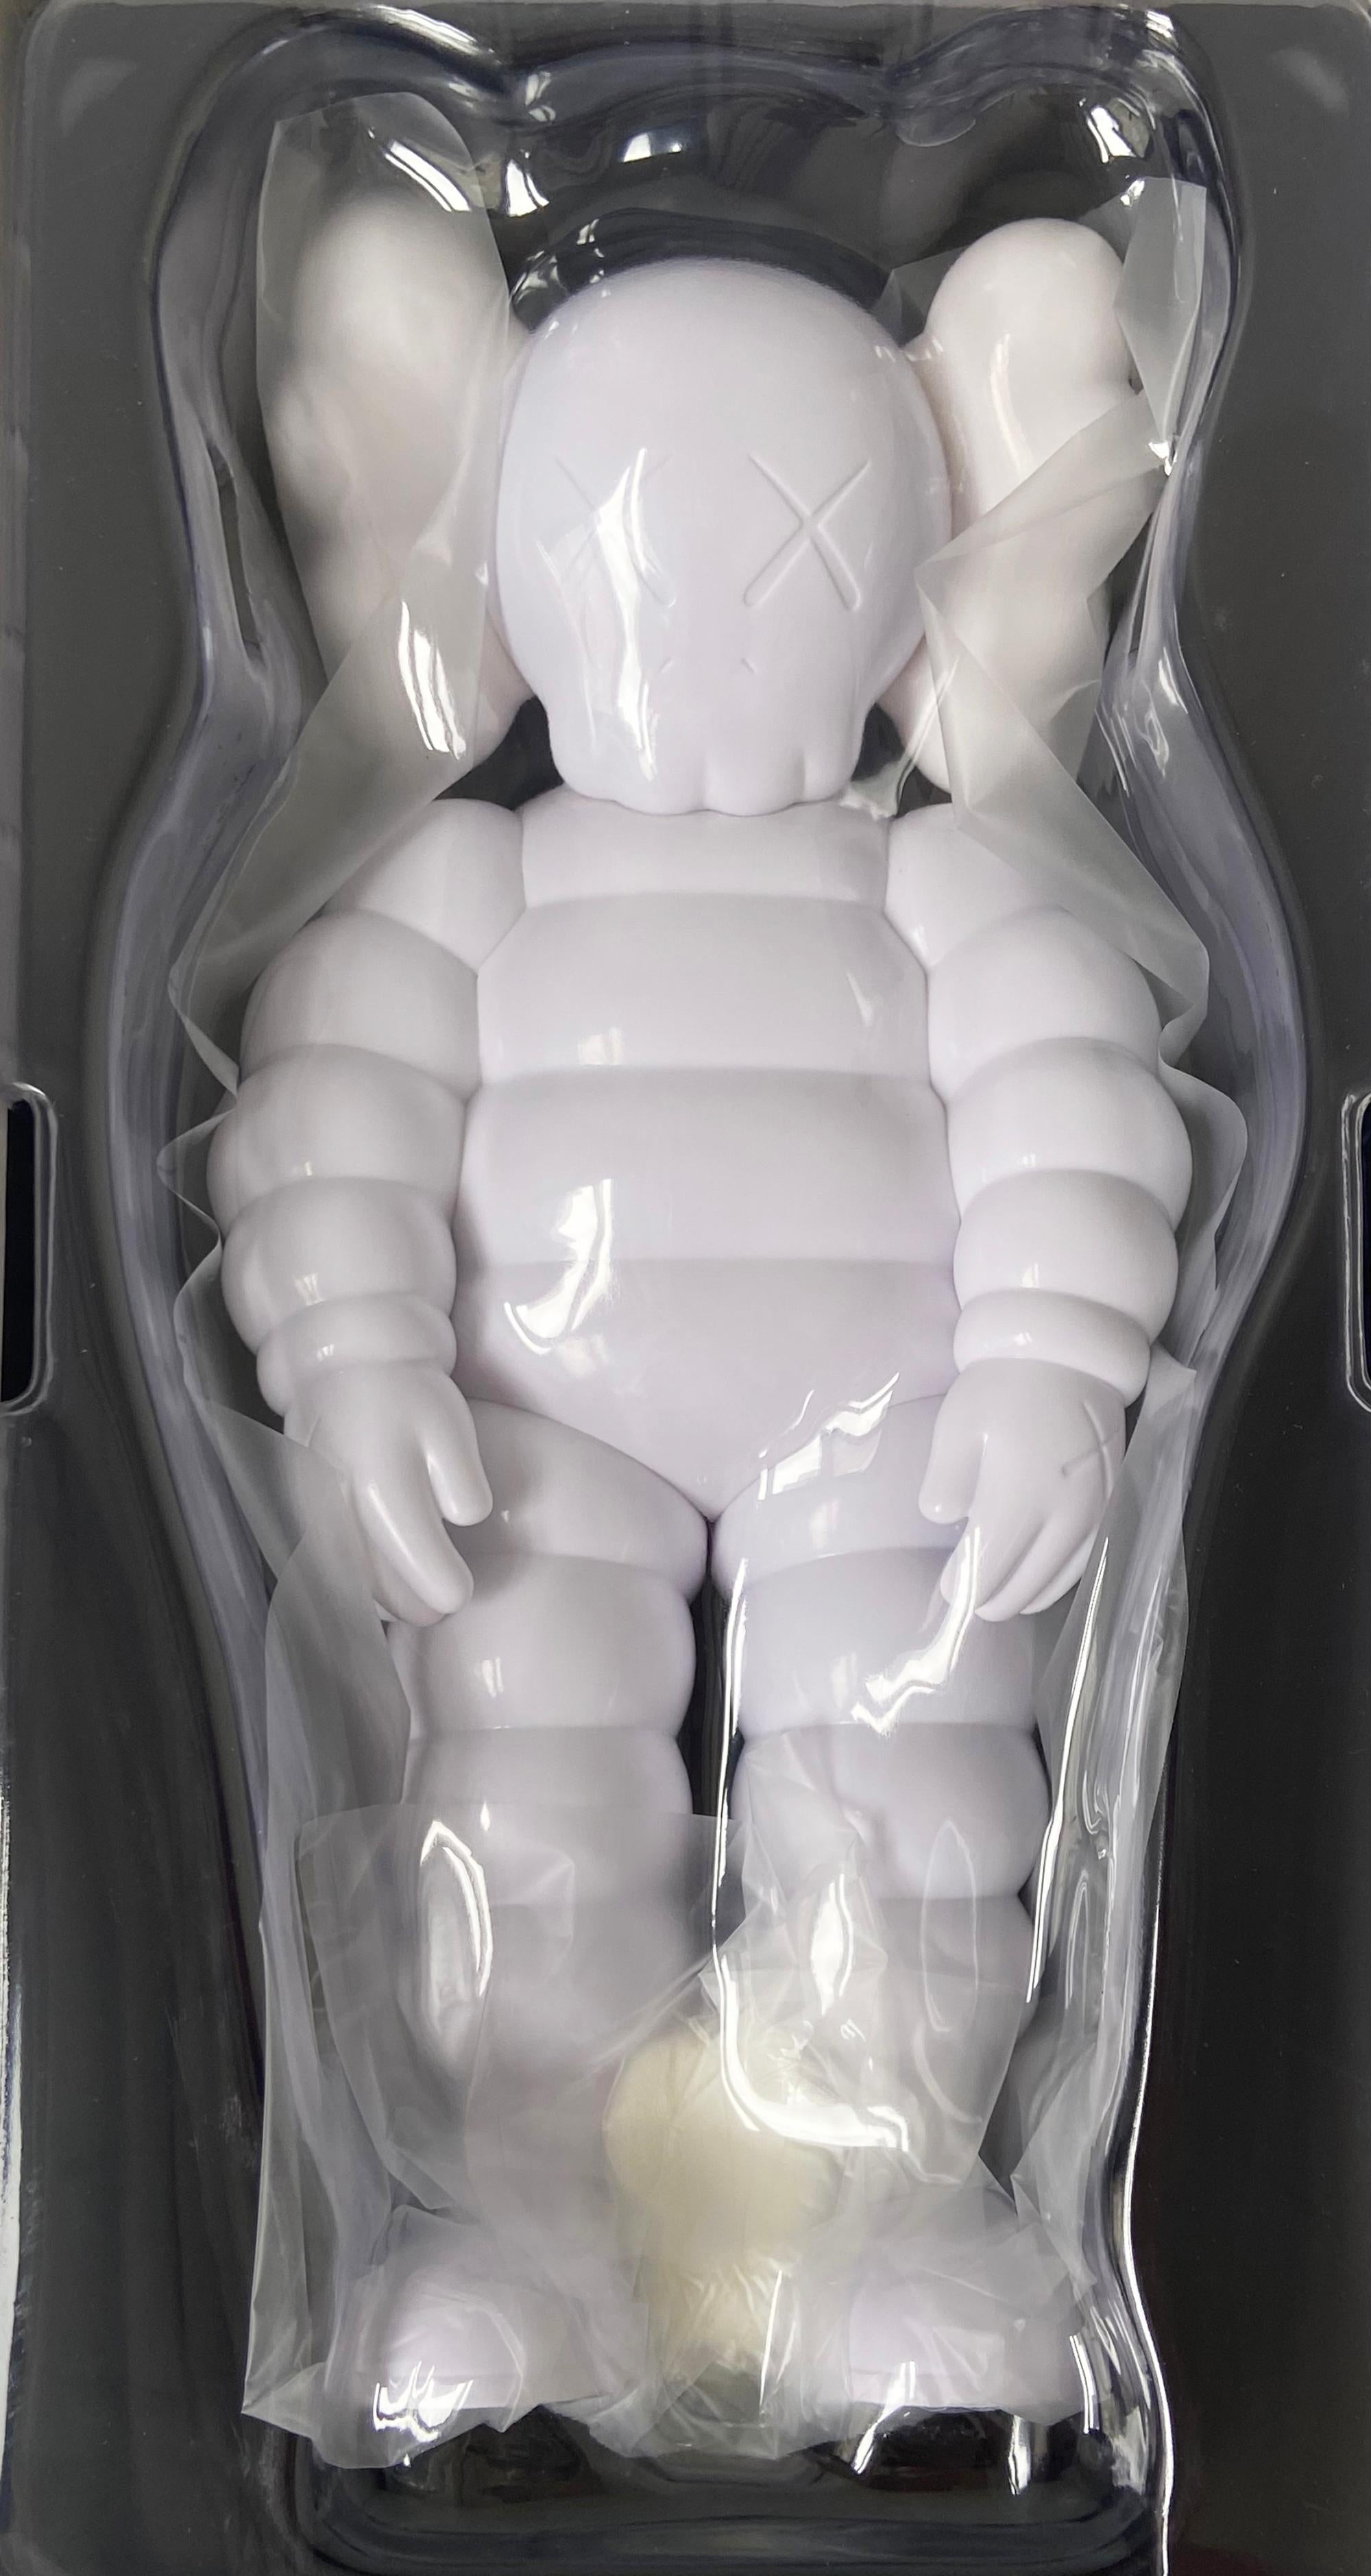 KAWS WHAT PARTY White: 
This KAWS Companion vinyl sculpture features KAWS' CHUM character in a hunched position. Published to commemorate the debut of KAWS’ larger scale sculptural version of same at K11 Musea Hong Kong. New in original packaging.